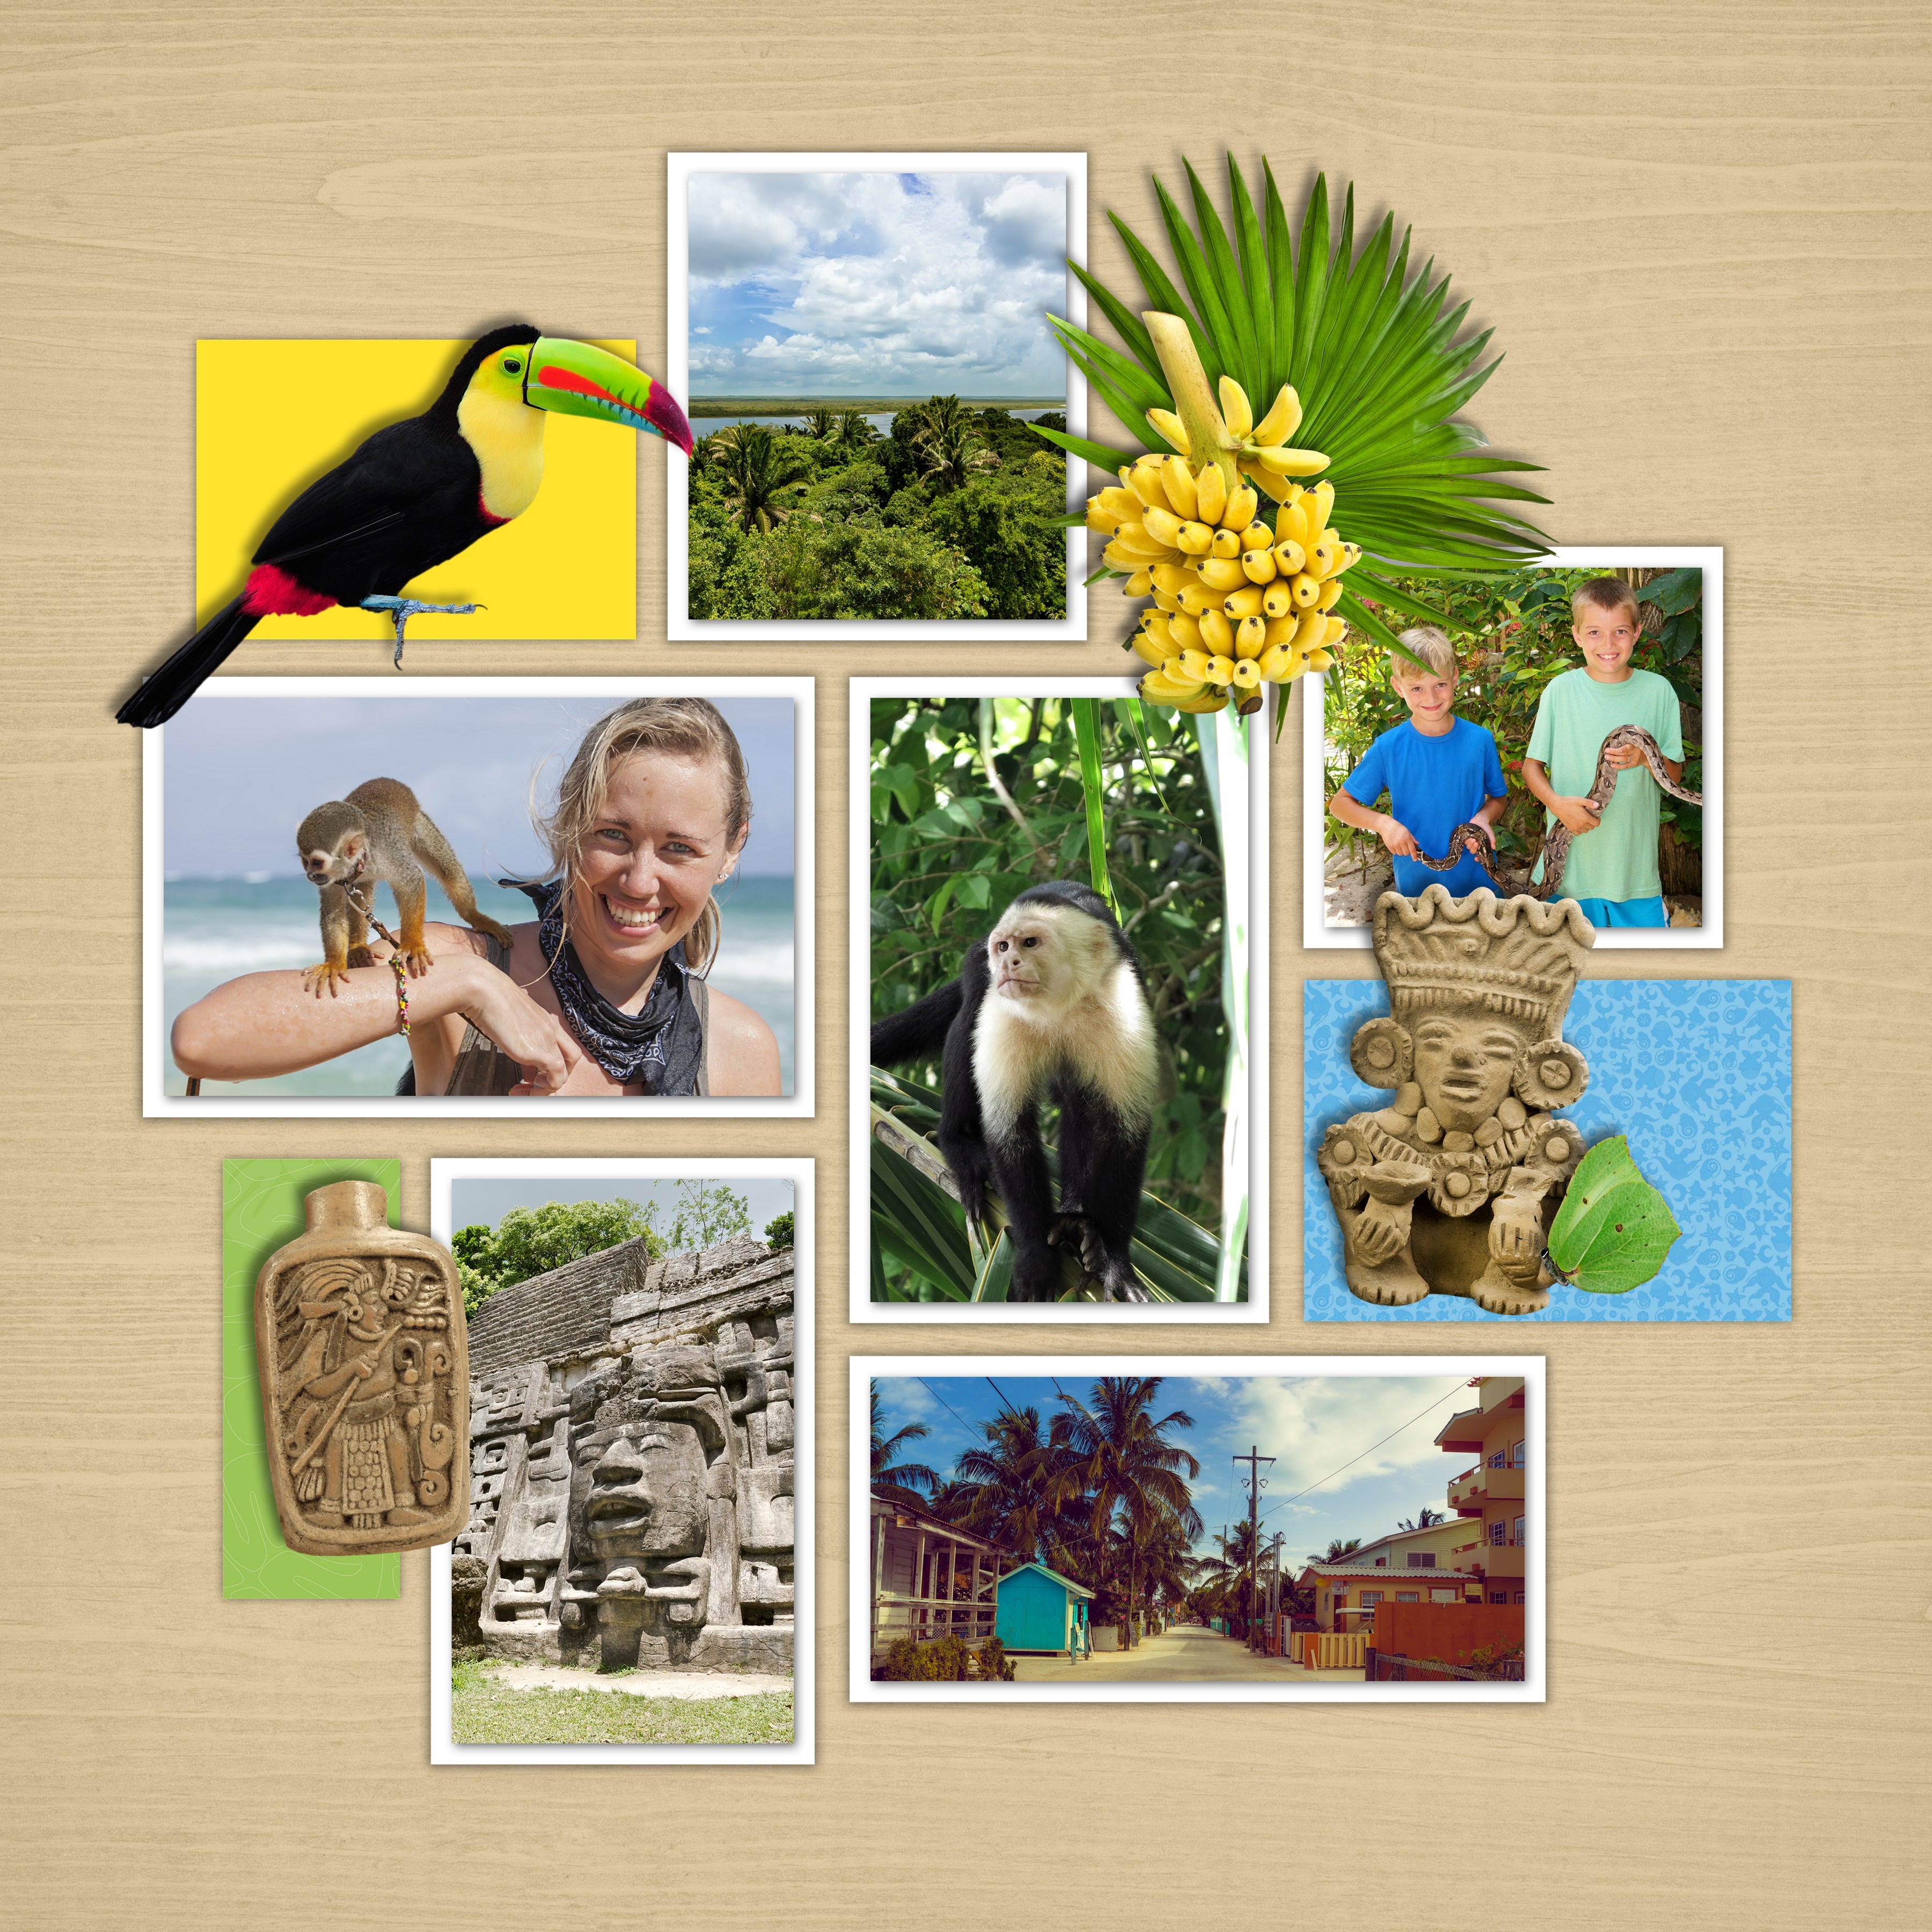 The Latin American Adventure Digital Scrapbook Kit is a diverse collection of digital art of Latin American embellishments, artifacts, and beautiful flora and fauna. If you have been meaning to document your memories from a trip to Central or South America or any of the Spanish/Portuguese speaking islands of the Caribbean, or are possibly planning a trip there soon, this collection is just what you need!